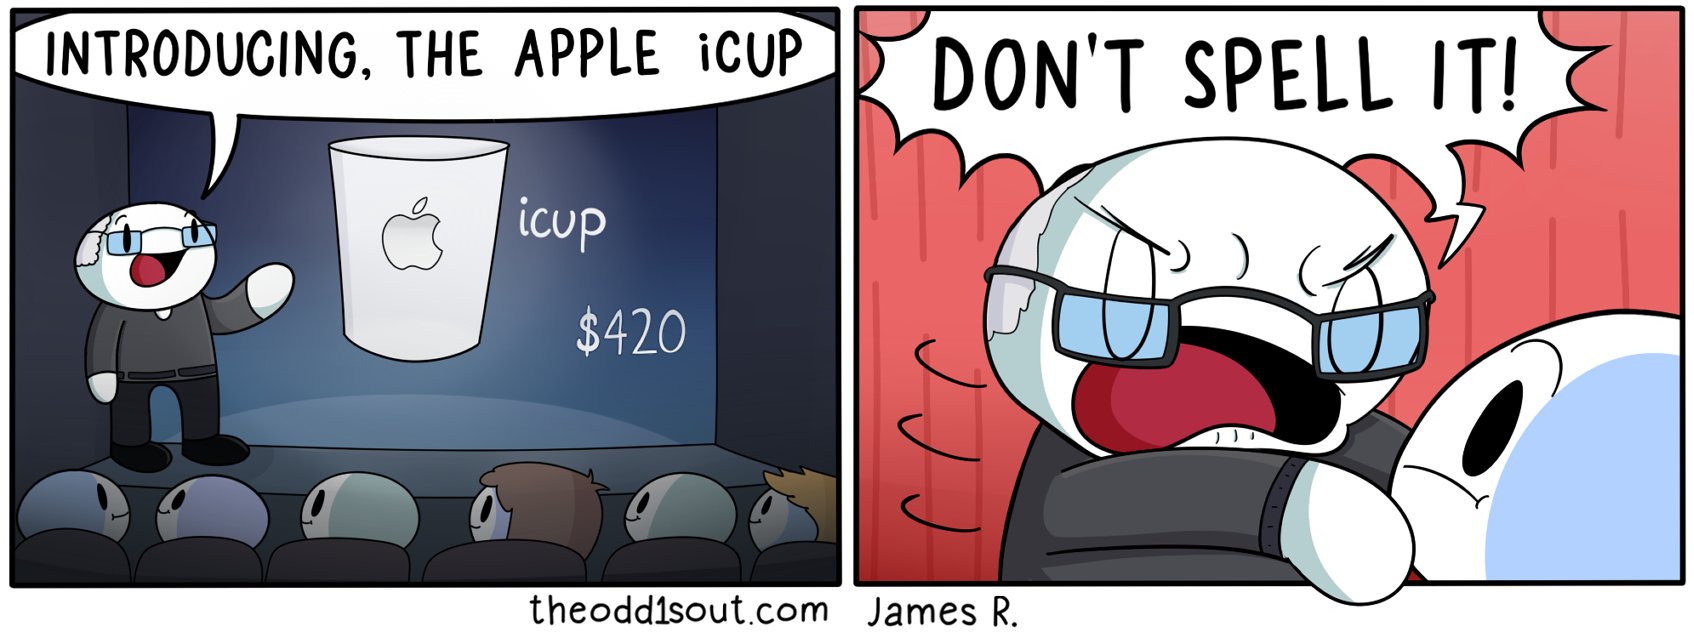 Theodd1sout New Comic Apple Icup